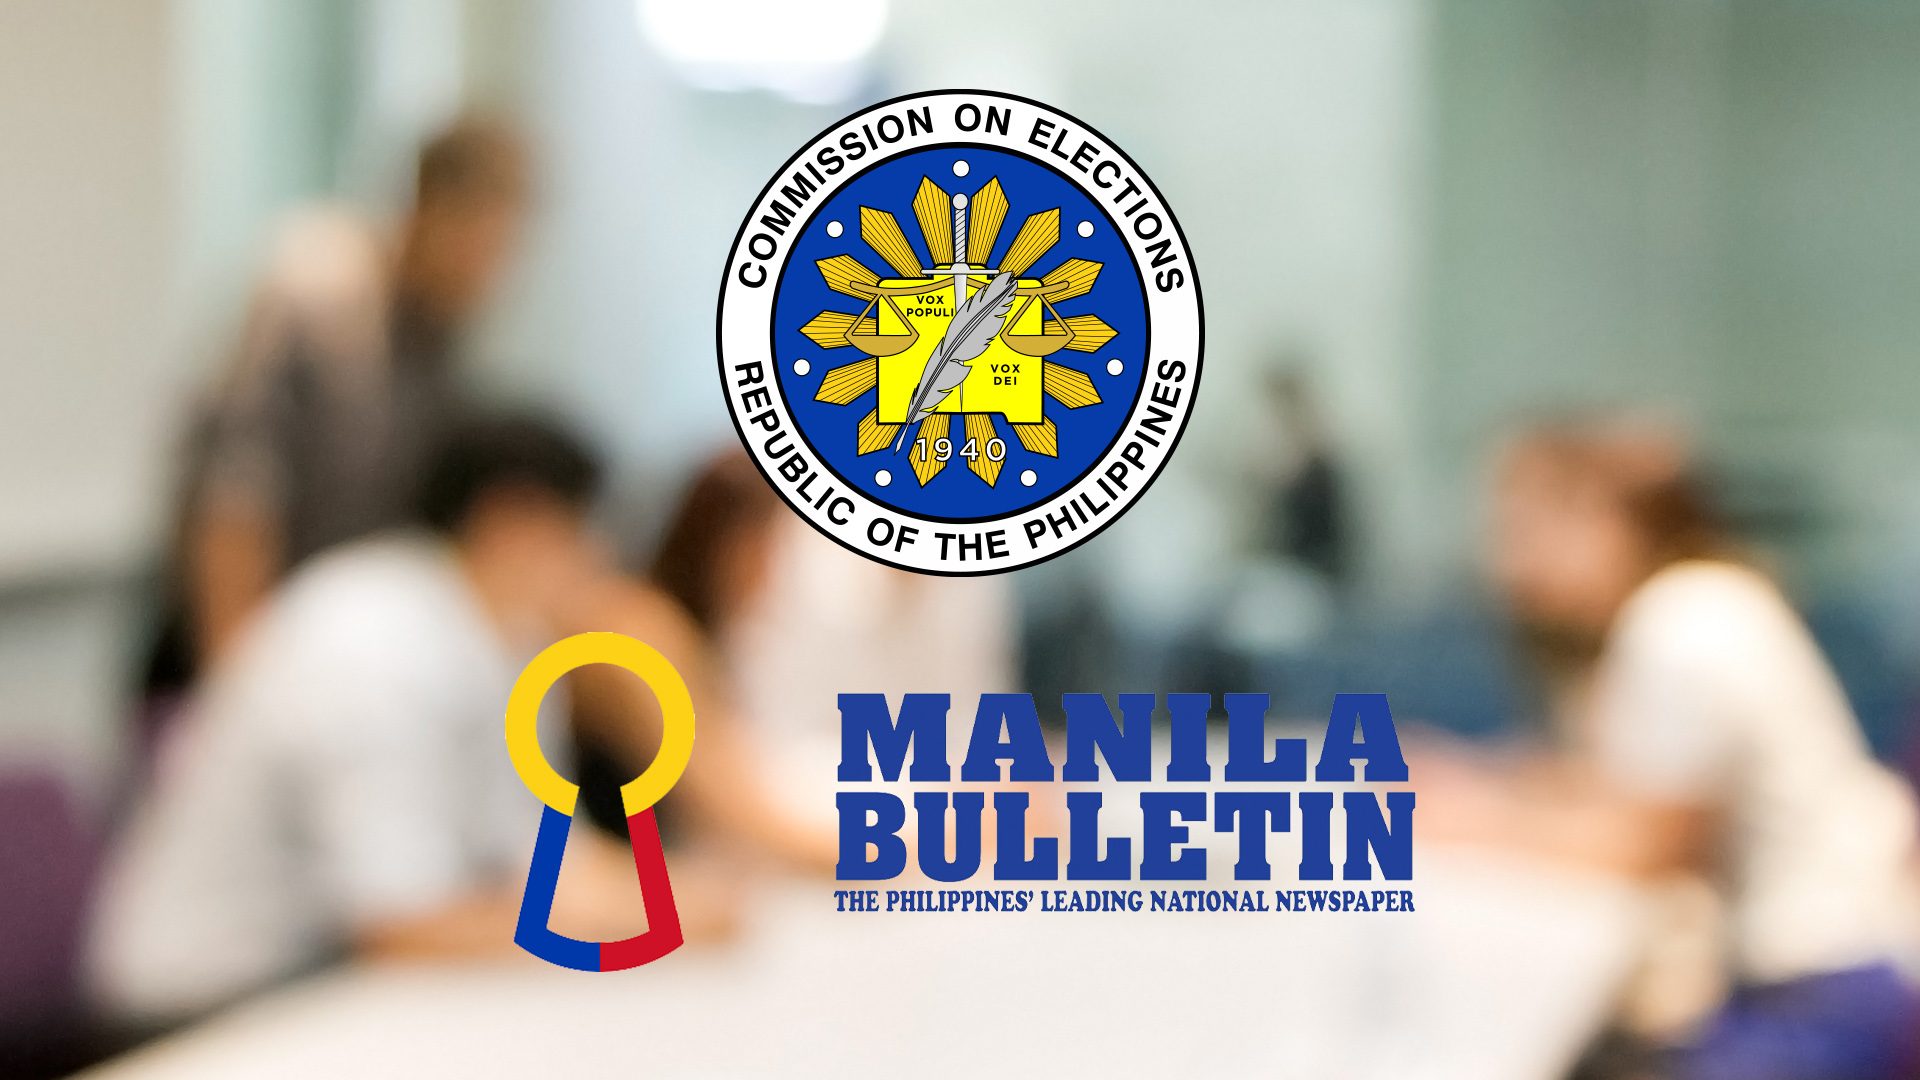 NPC sets January 25 meeting with Comelec, Manila Bulletin on alleged hack